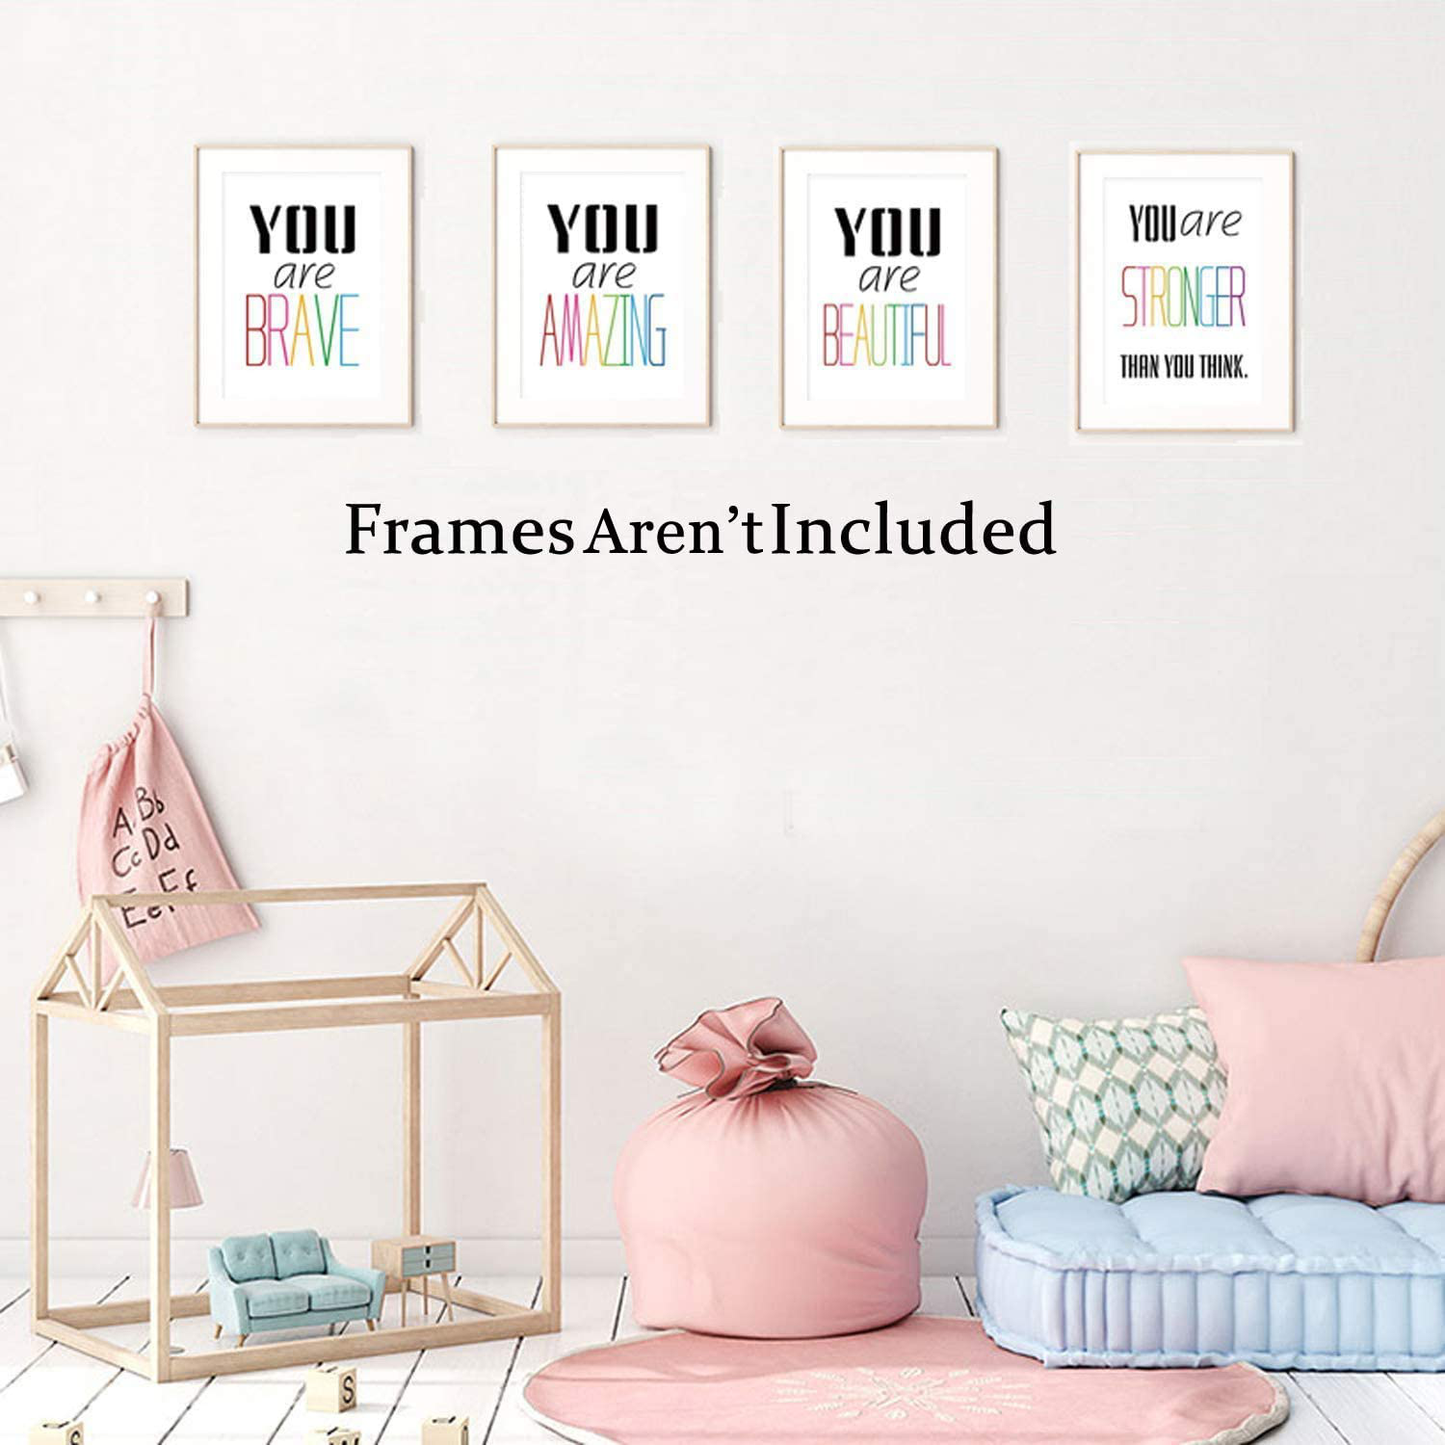 HPNIUB Typography Watercolor Words Inspirational Quote&Saying Modern Art Print Set of 4 (12”X16” Canvas Painting，Motivational Phrases Wall Art Poster for Nursery or Kids Room Home Decor，No Frame